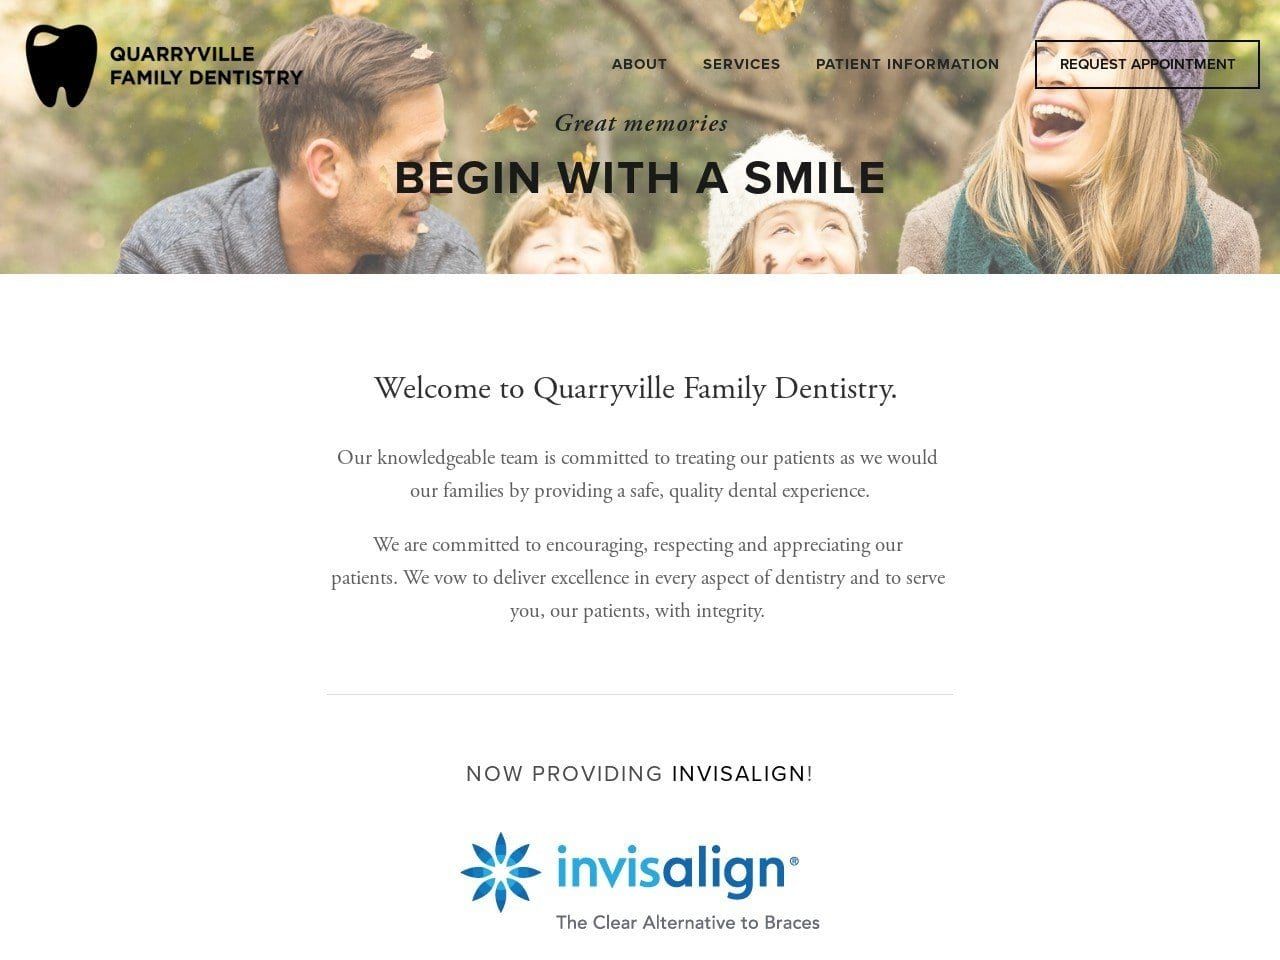 Quarryville Family Dentistry Website Screenshot from qfdentistry.com